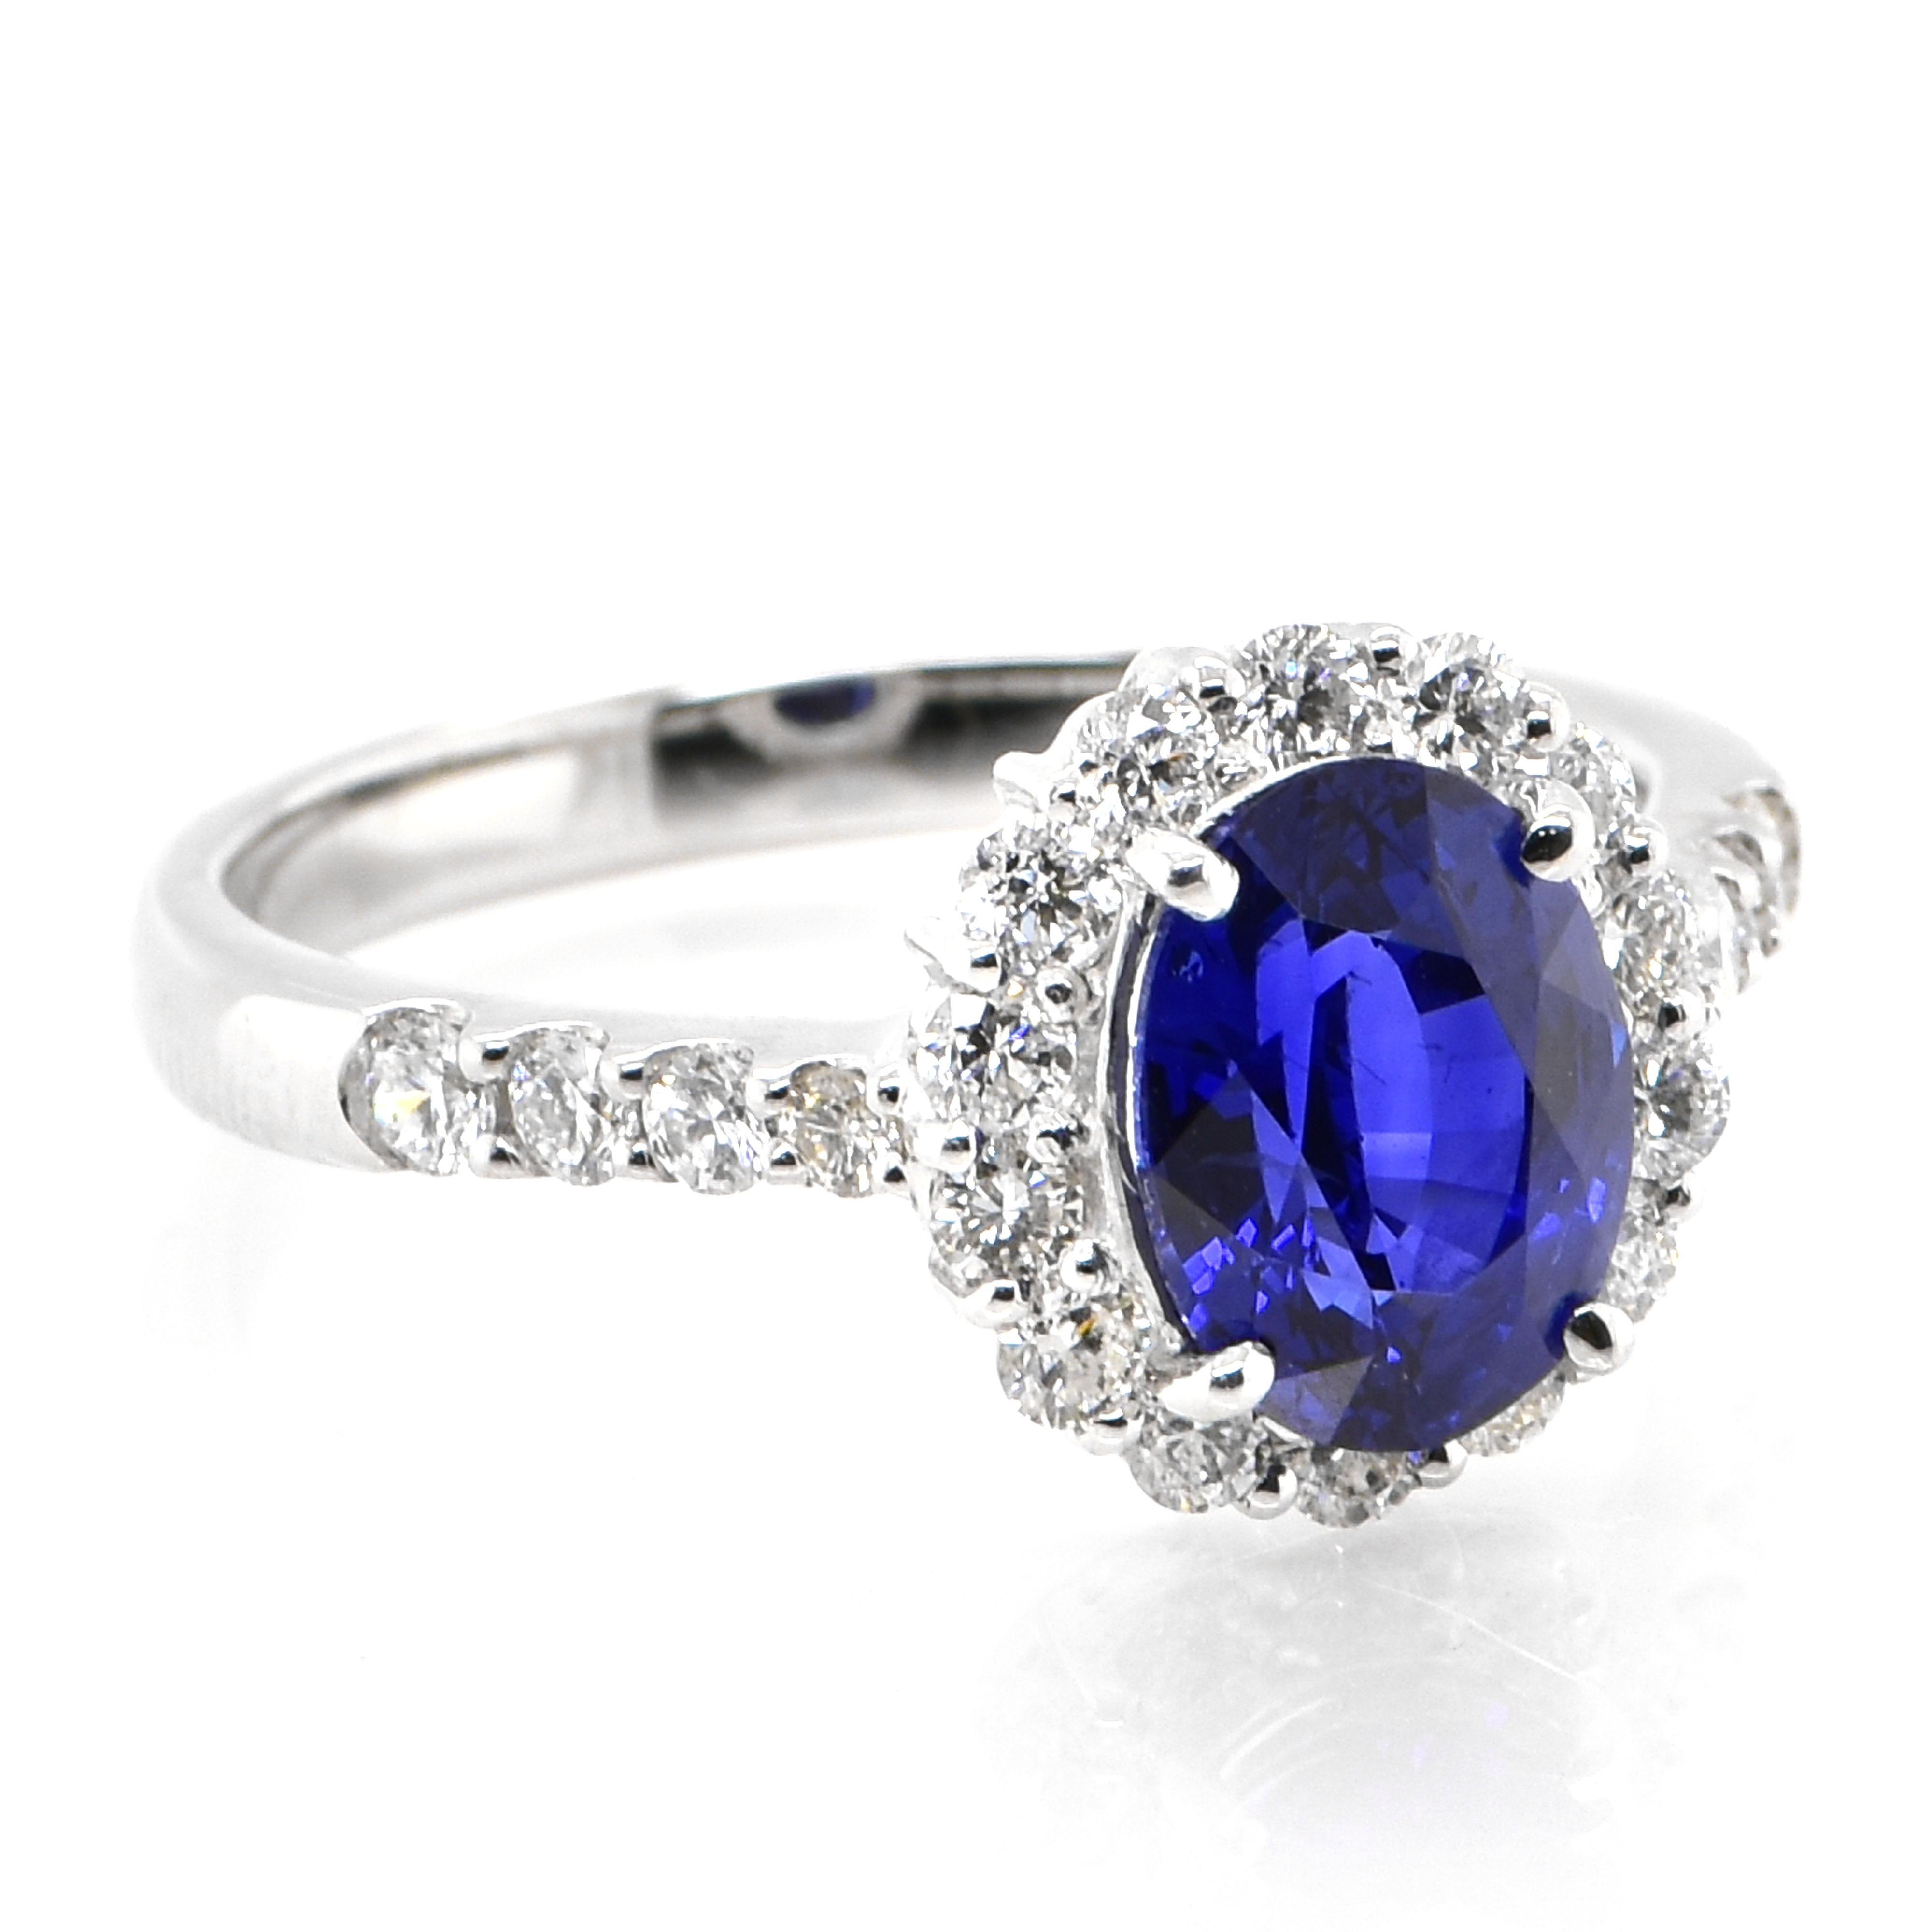 Modern 1.92 Carat Natural Royal Blue Sapphire and Diamond Halo Ring Made in Platinum For Sale